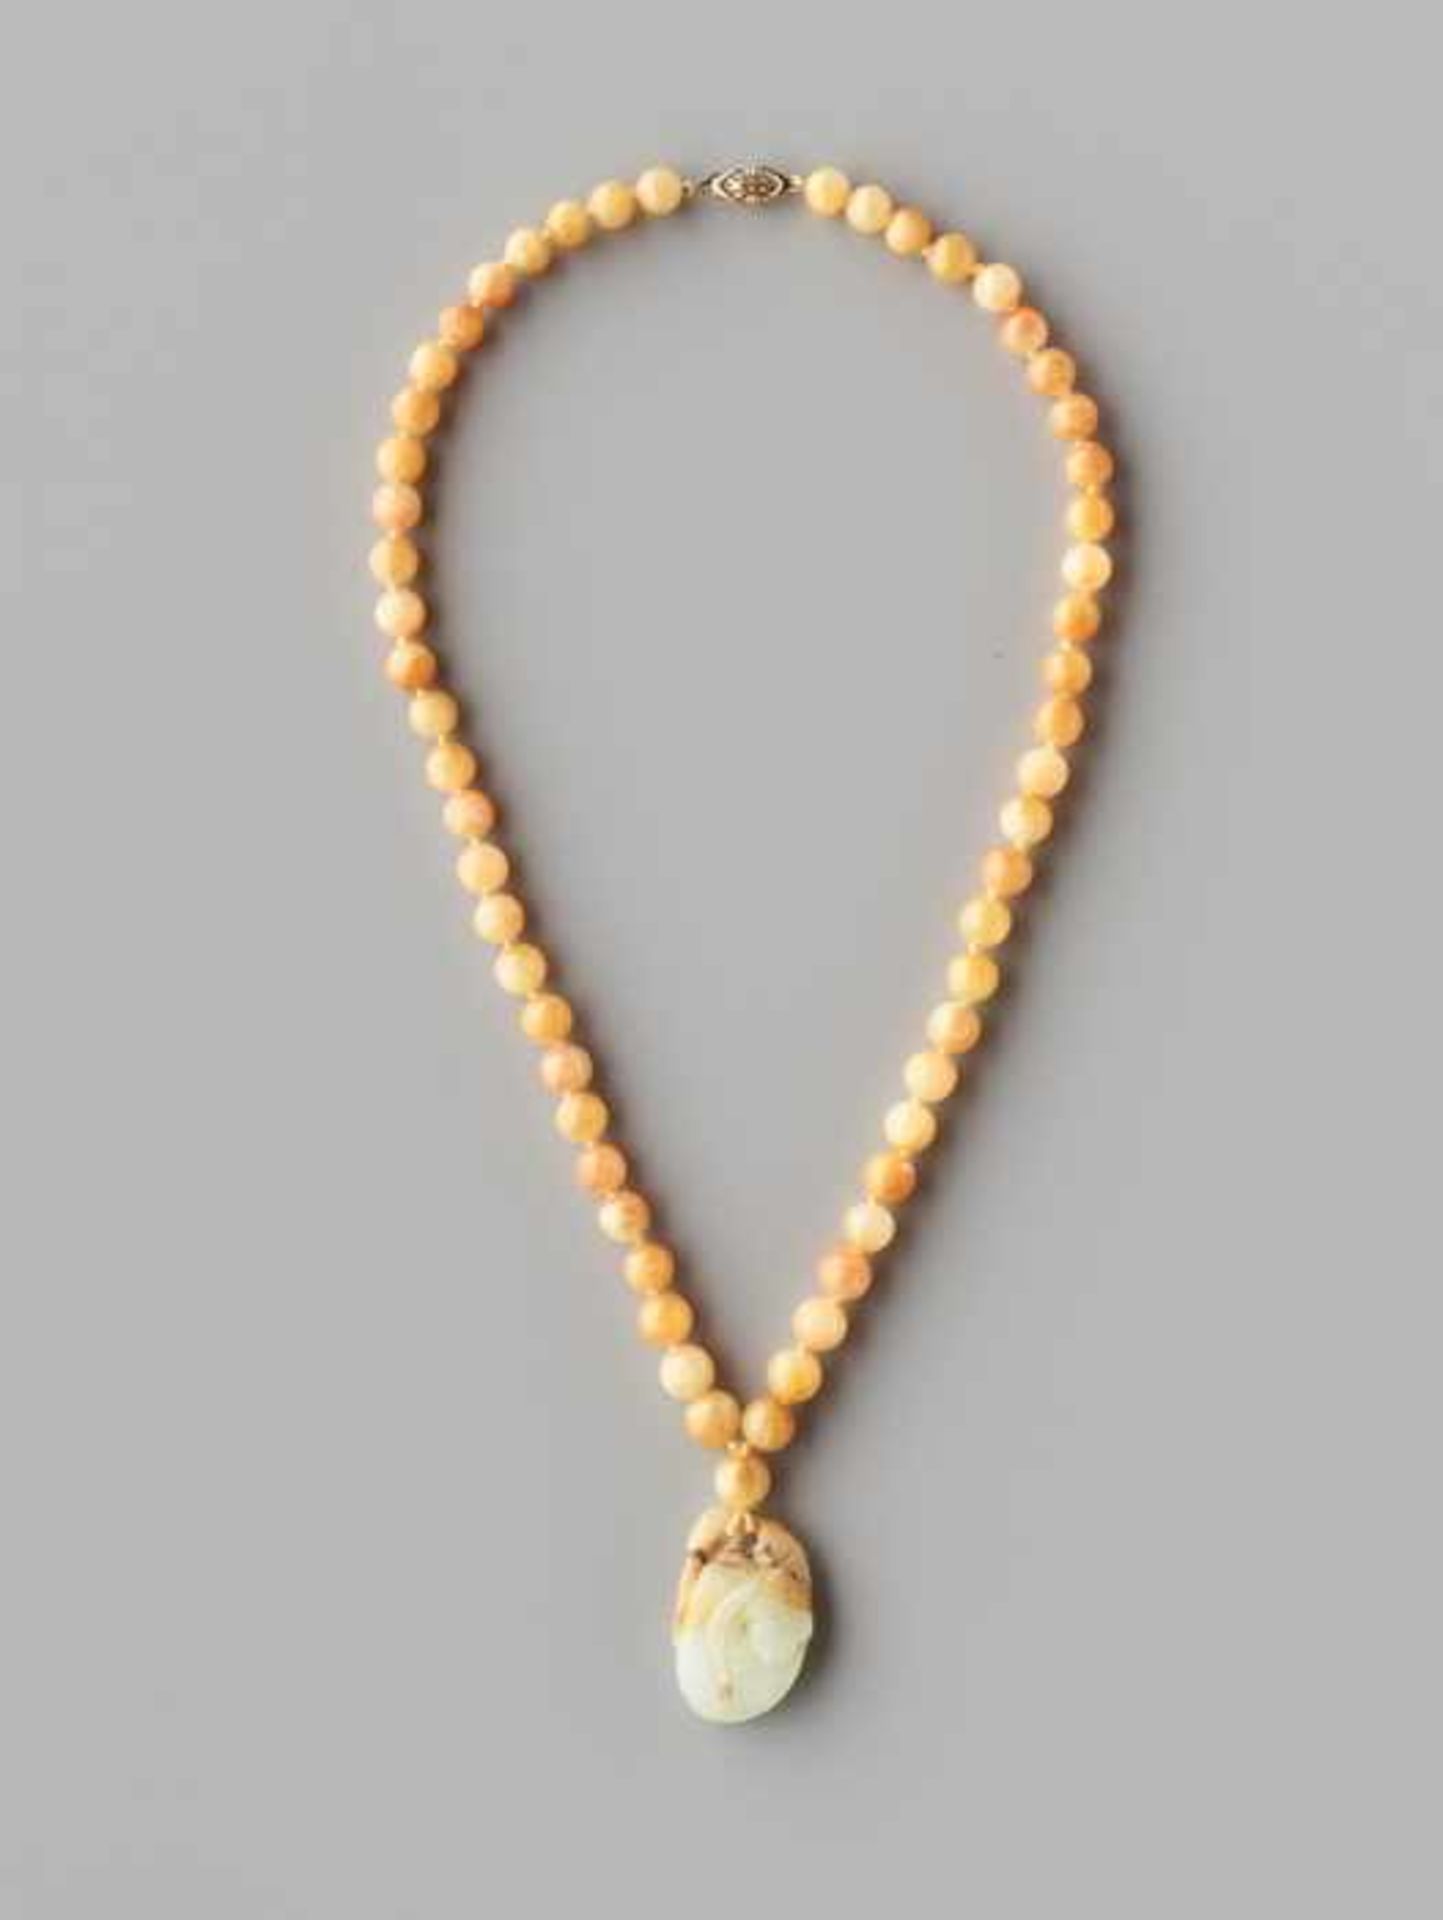 A YELLOW JADEITE NECKLACE WITH A NEPHRITE ‘PEACH’ PENDANT, 57 BEADS The 57 beads of natural fei